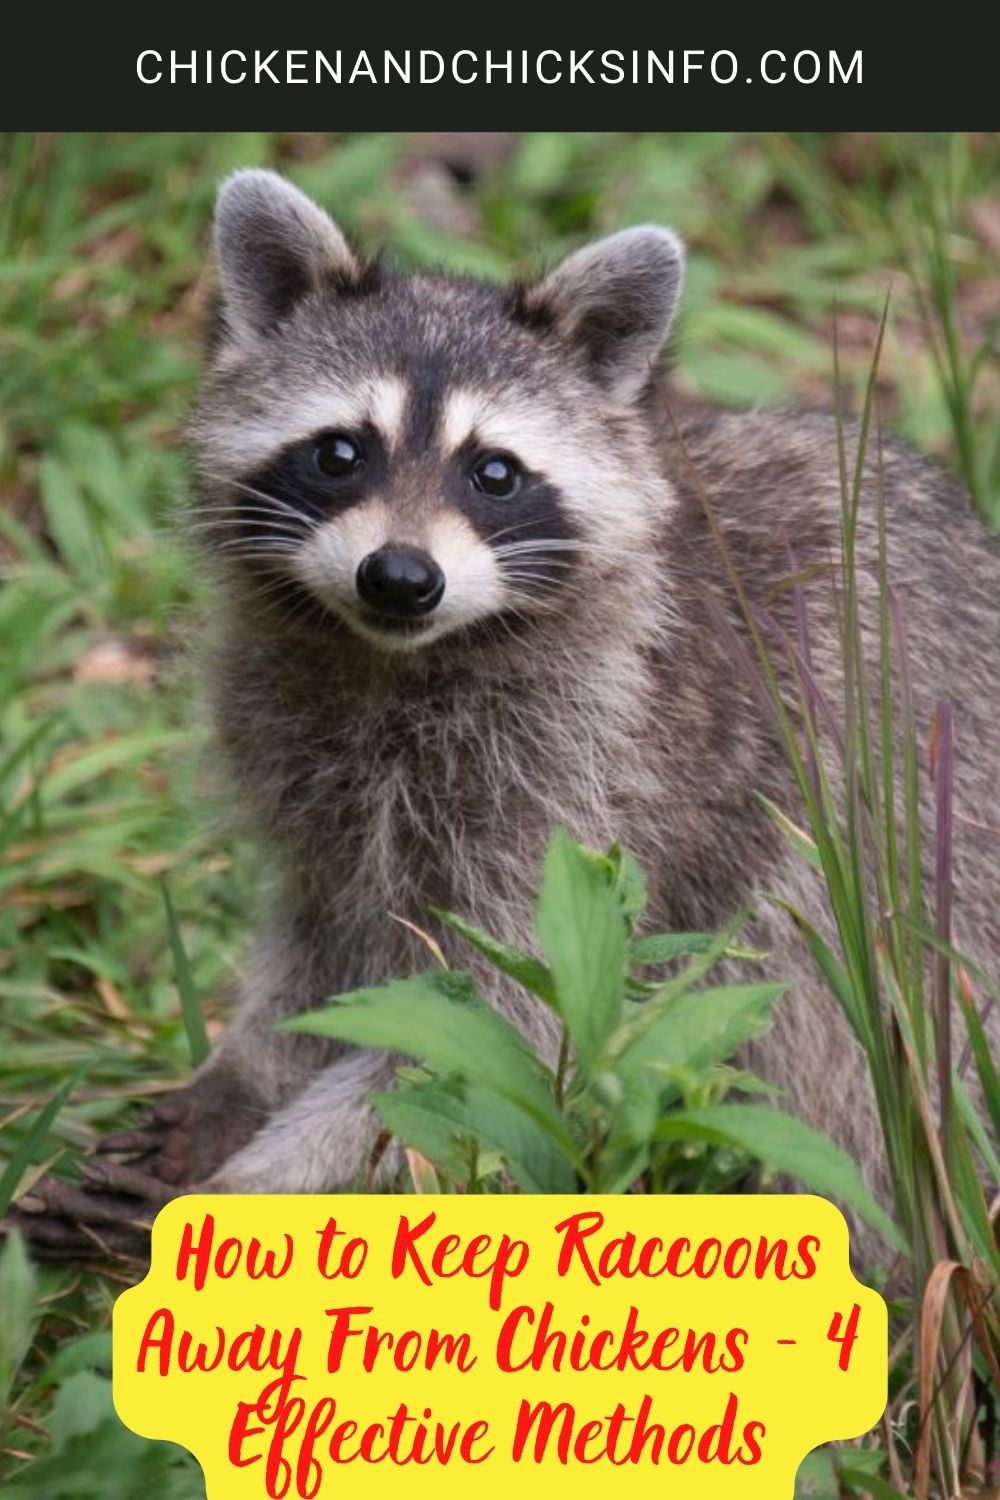 How to Keep Raccoons Away From Chickens - 4 Effective Methods poster.